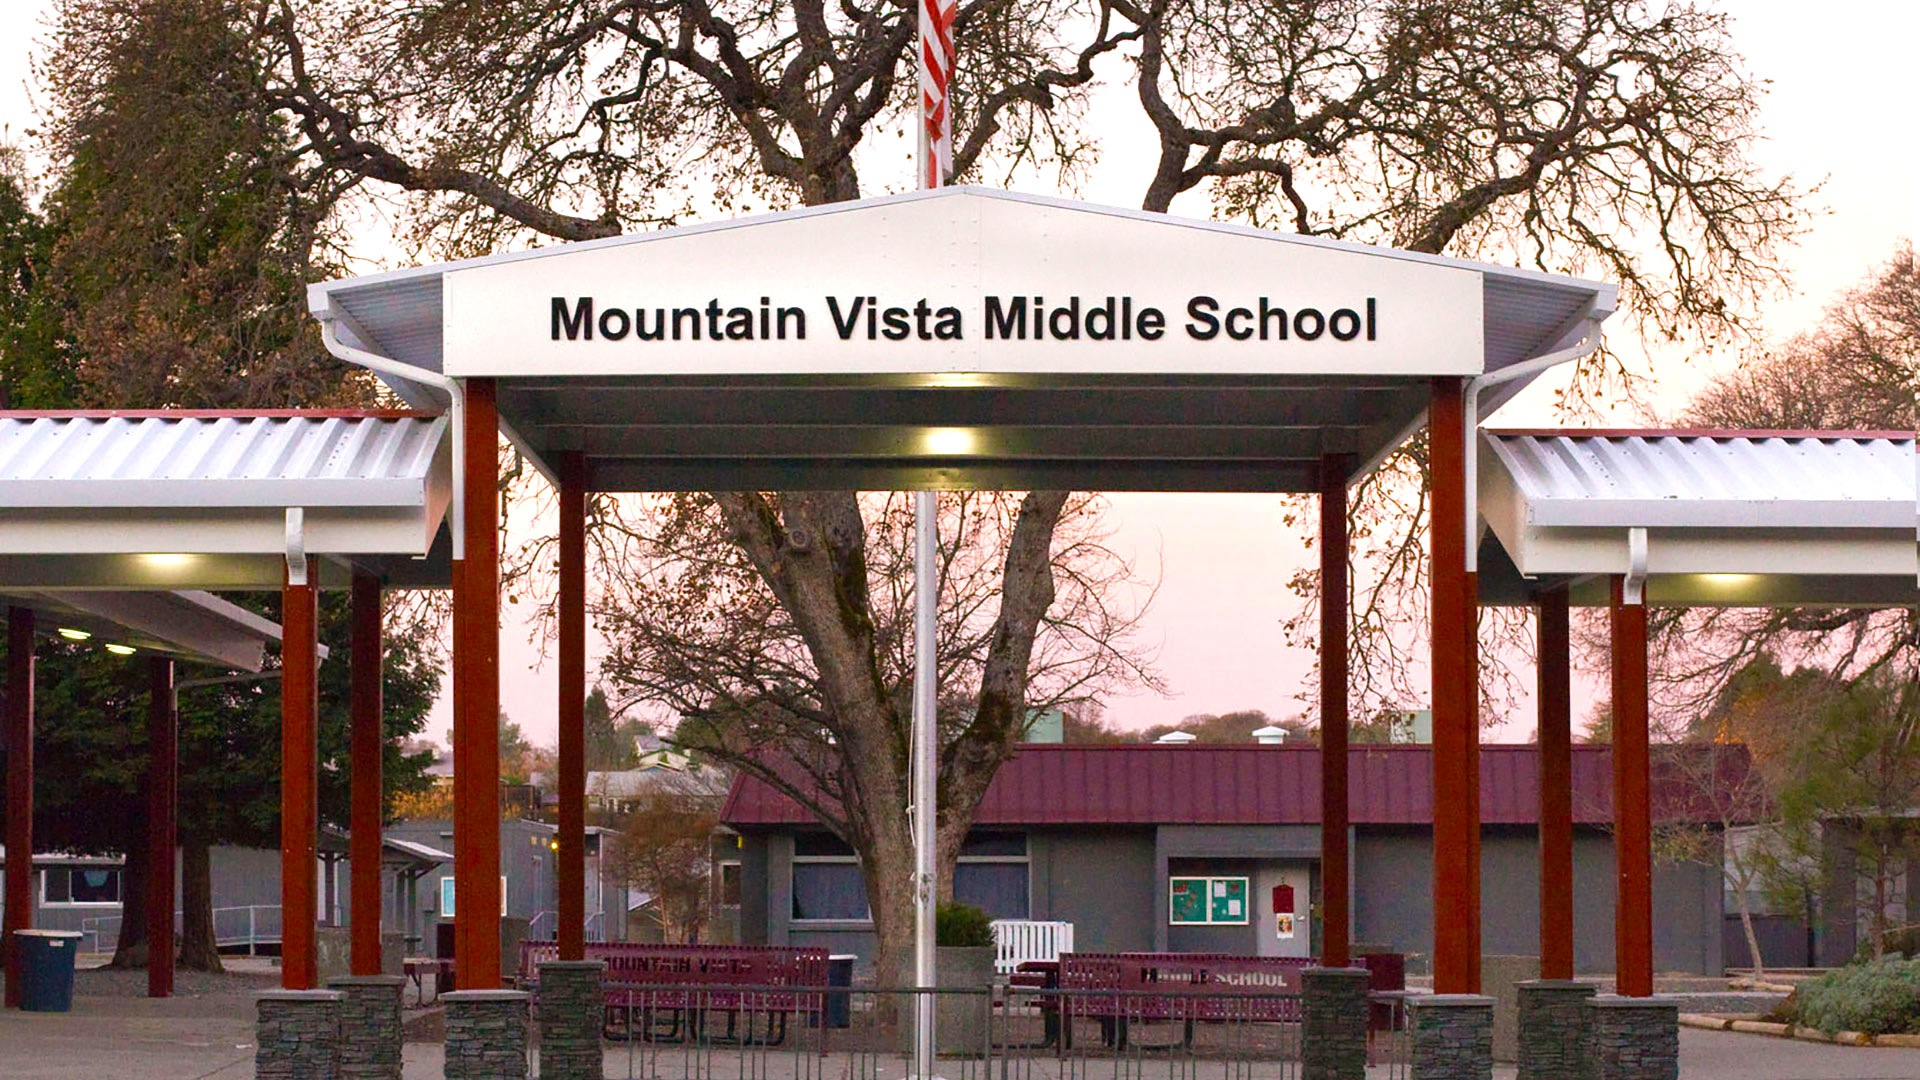 Metal shade structure, with red posts and white tops, with the school name lettered at the entrance.